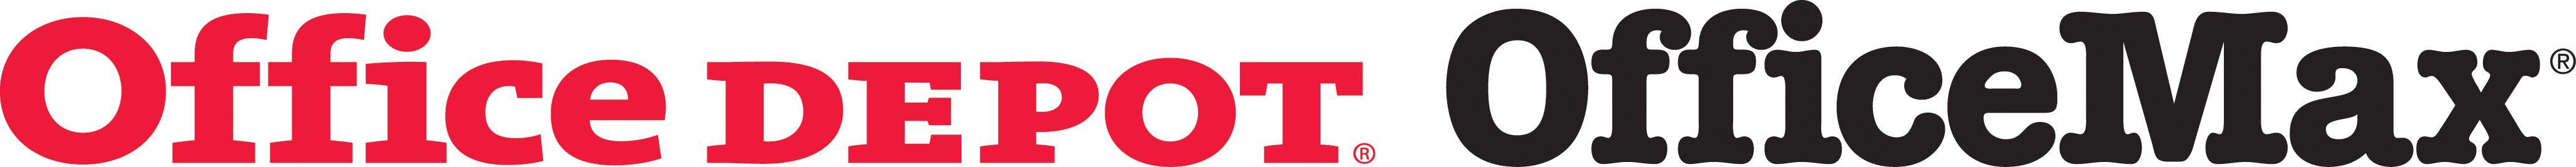 New Office Depot OfficeMax Logo - Office Depot, Inc. Brings Innovation to Business Interior Design and ...